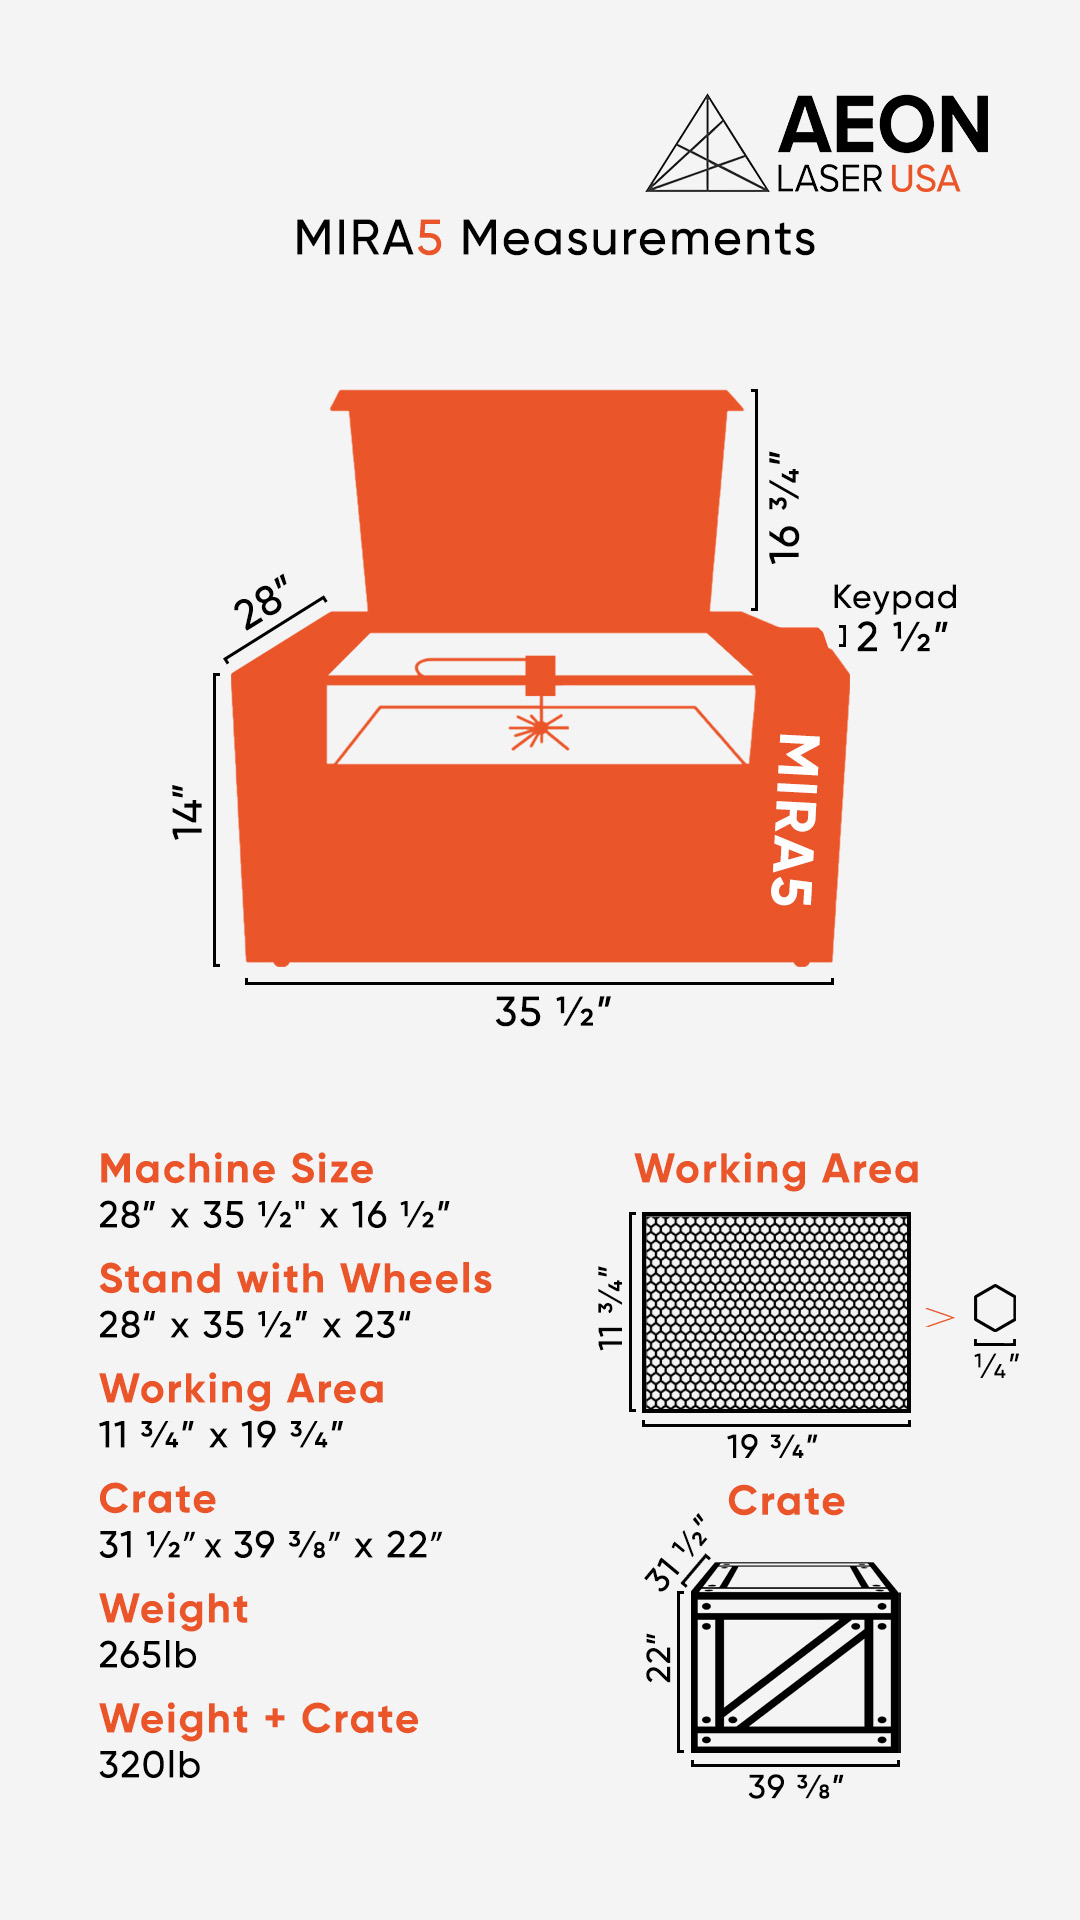 Graphic showing the dimensions of the MIRA 5 laser, crate size, and weight info